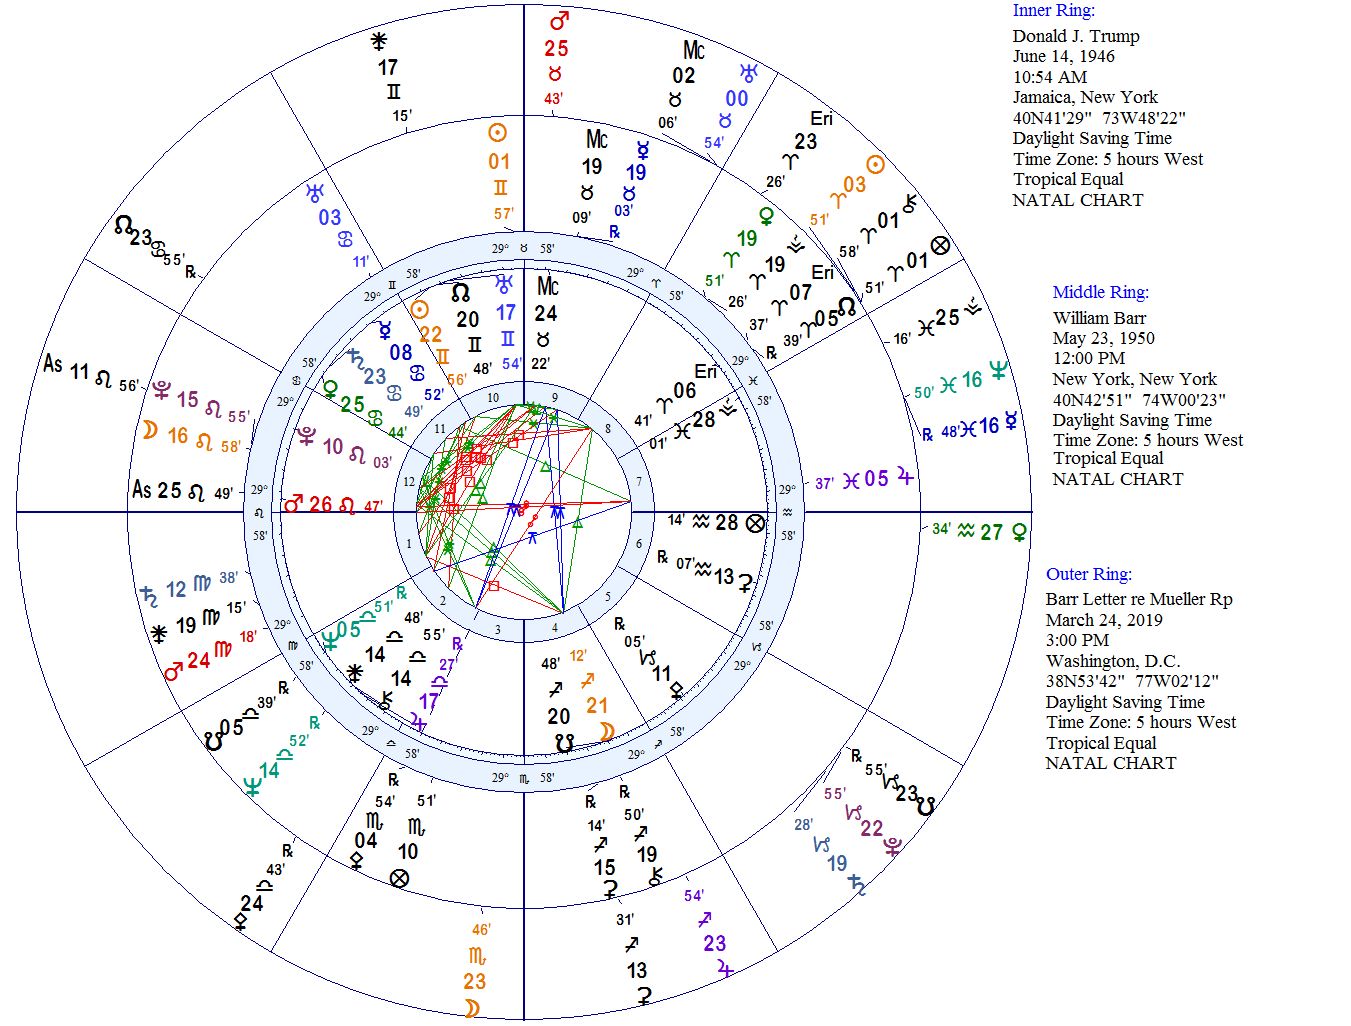 At this point, let’s take a very cursory look at how the natal charts of Tr...